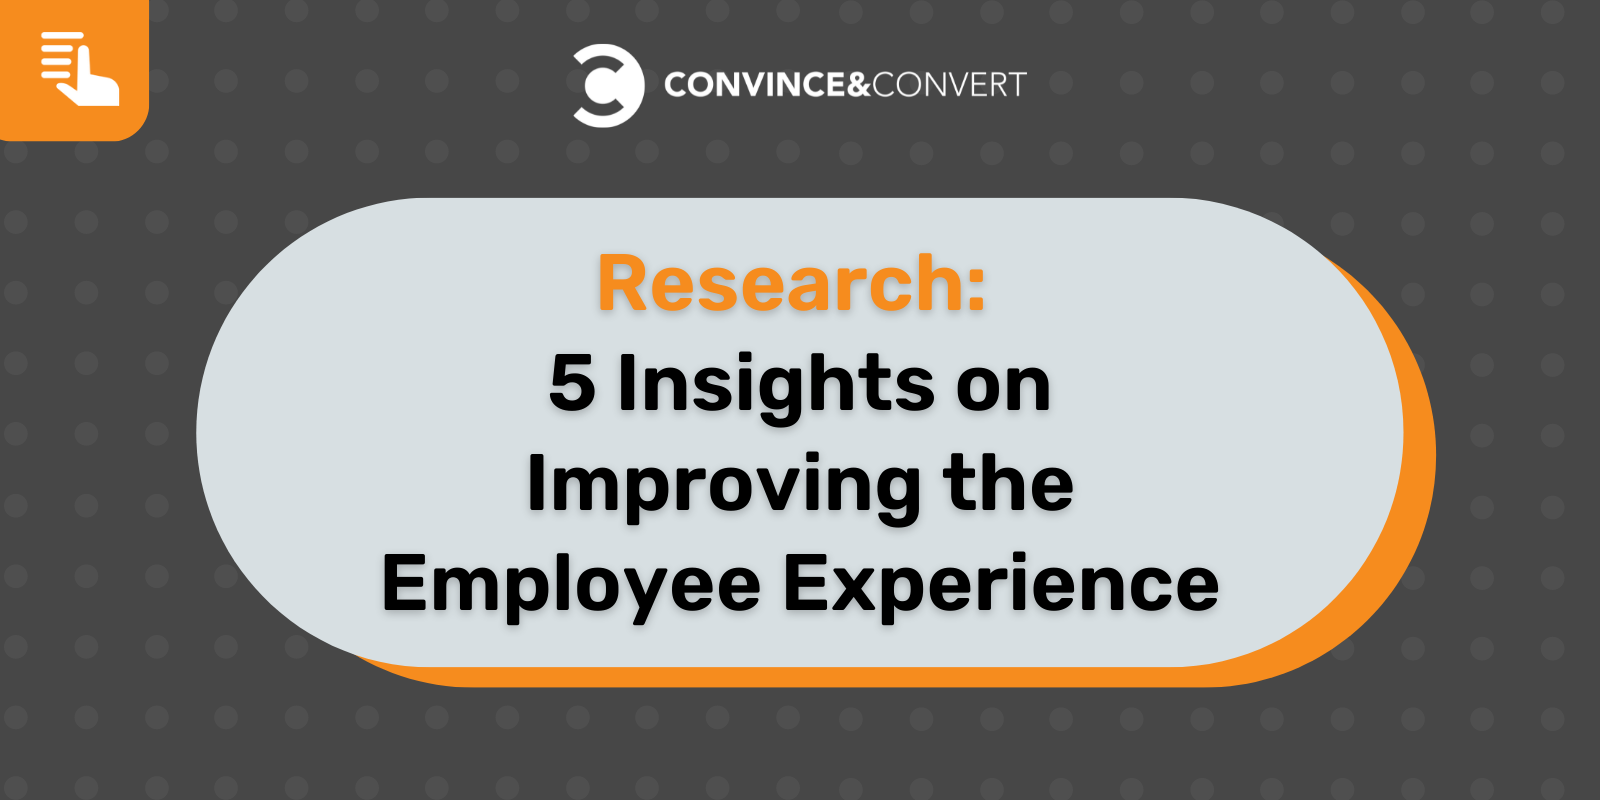 You are currently viewing Research: 5 Insights on Improving the Employee Experience